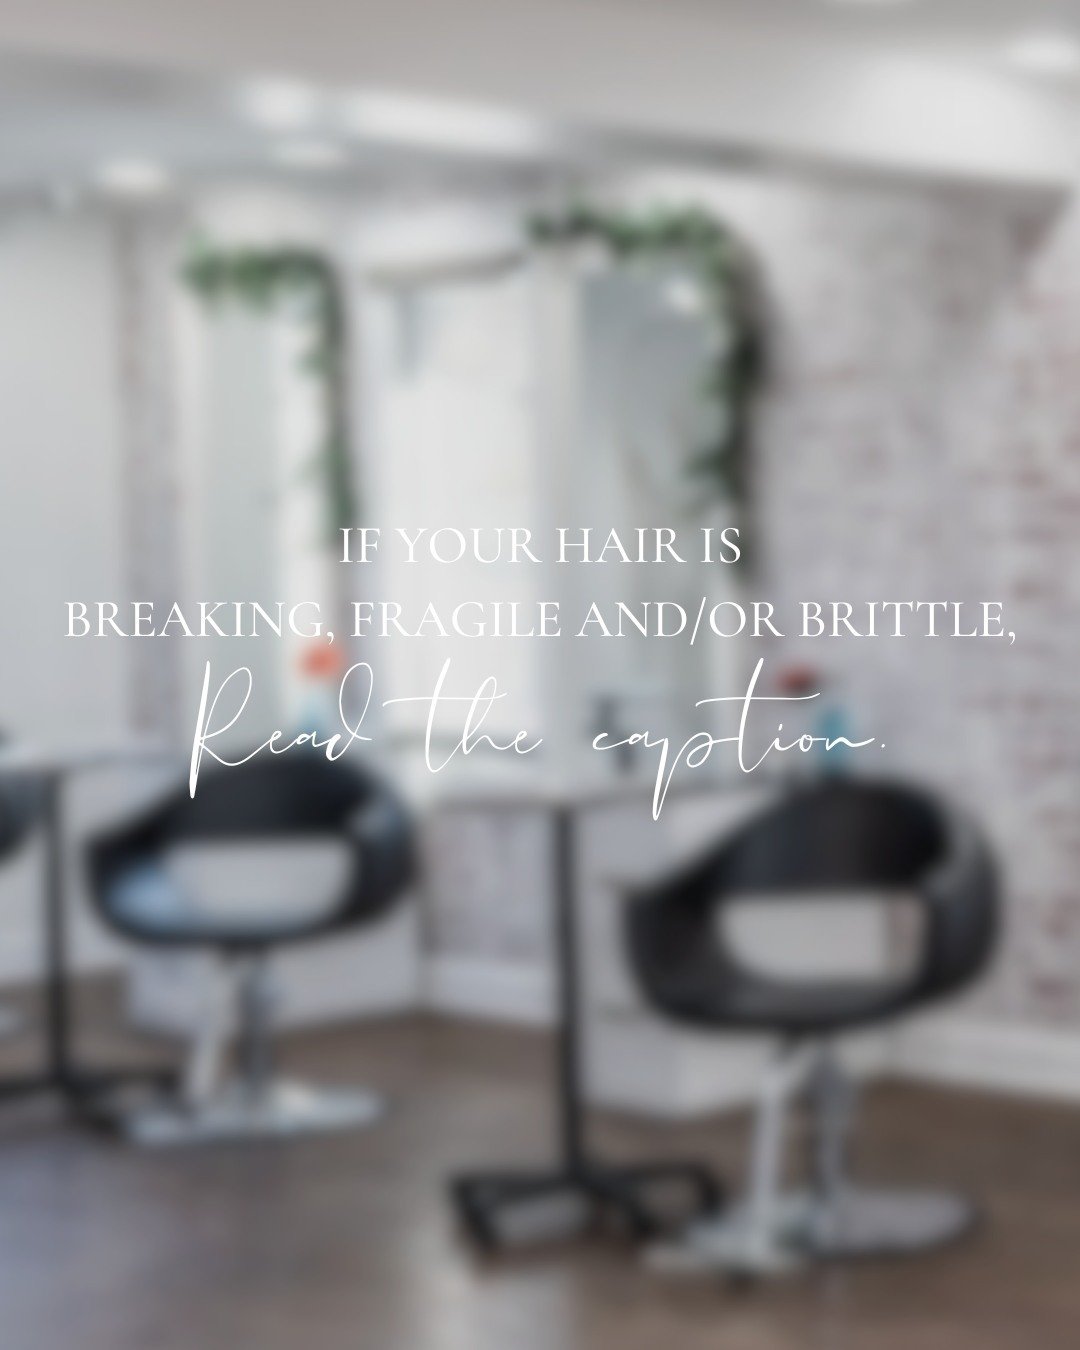 Here's how to fix breaking, fragile and brittle hair. ❤️

The first step is to visit a knowledgeable and skilled stylist. We can assess your hair, scalp &amp; products you're using to get a true look at what's going on. Not all hairstylists are creat